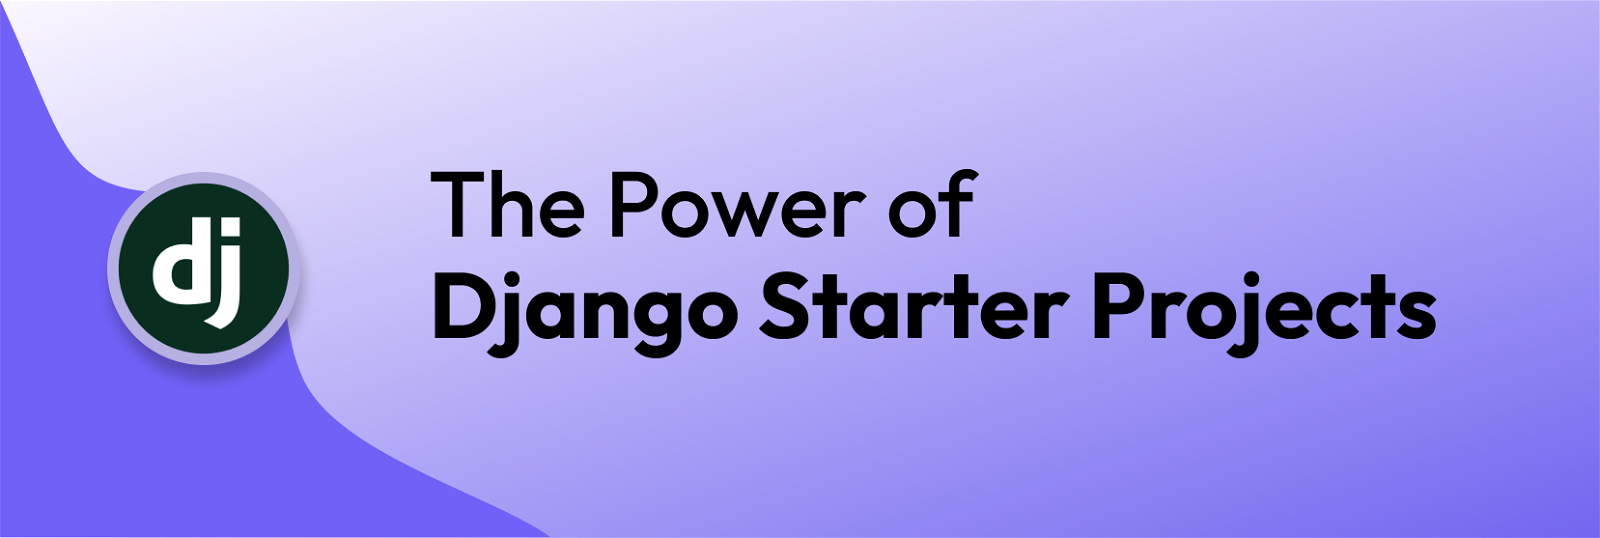 The power of Django Starter Projects